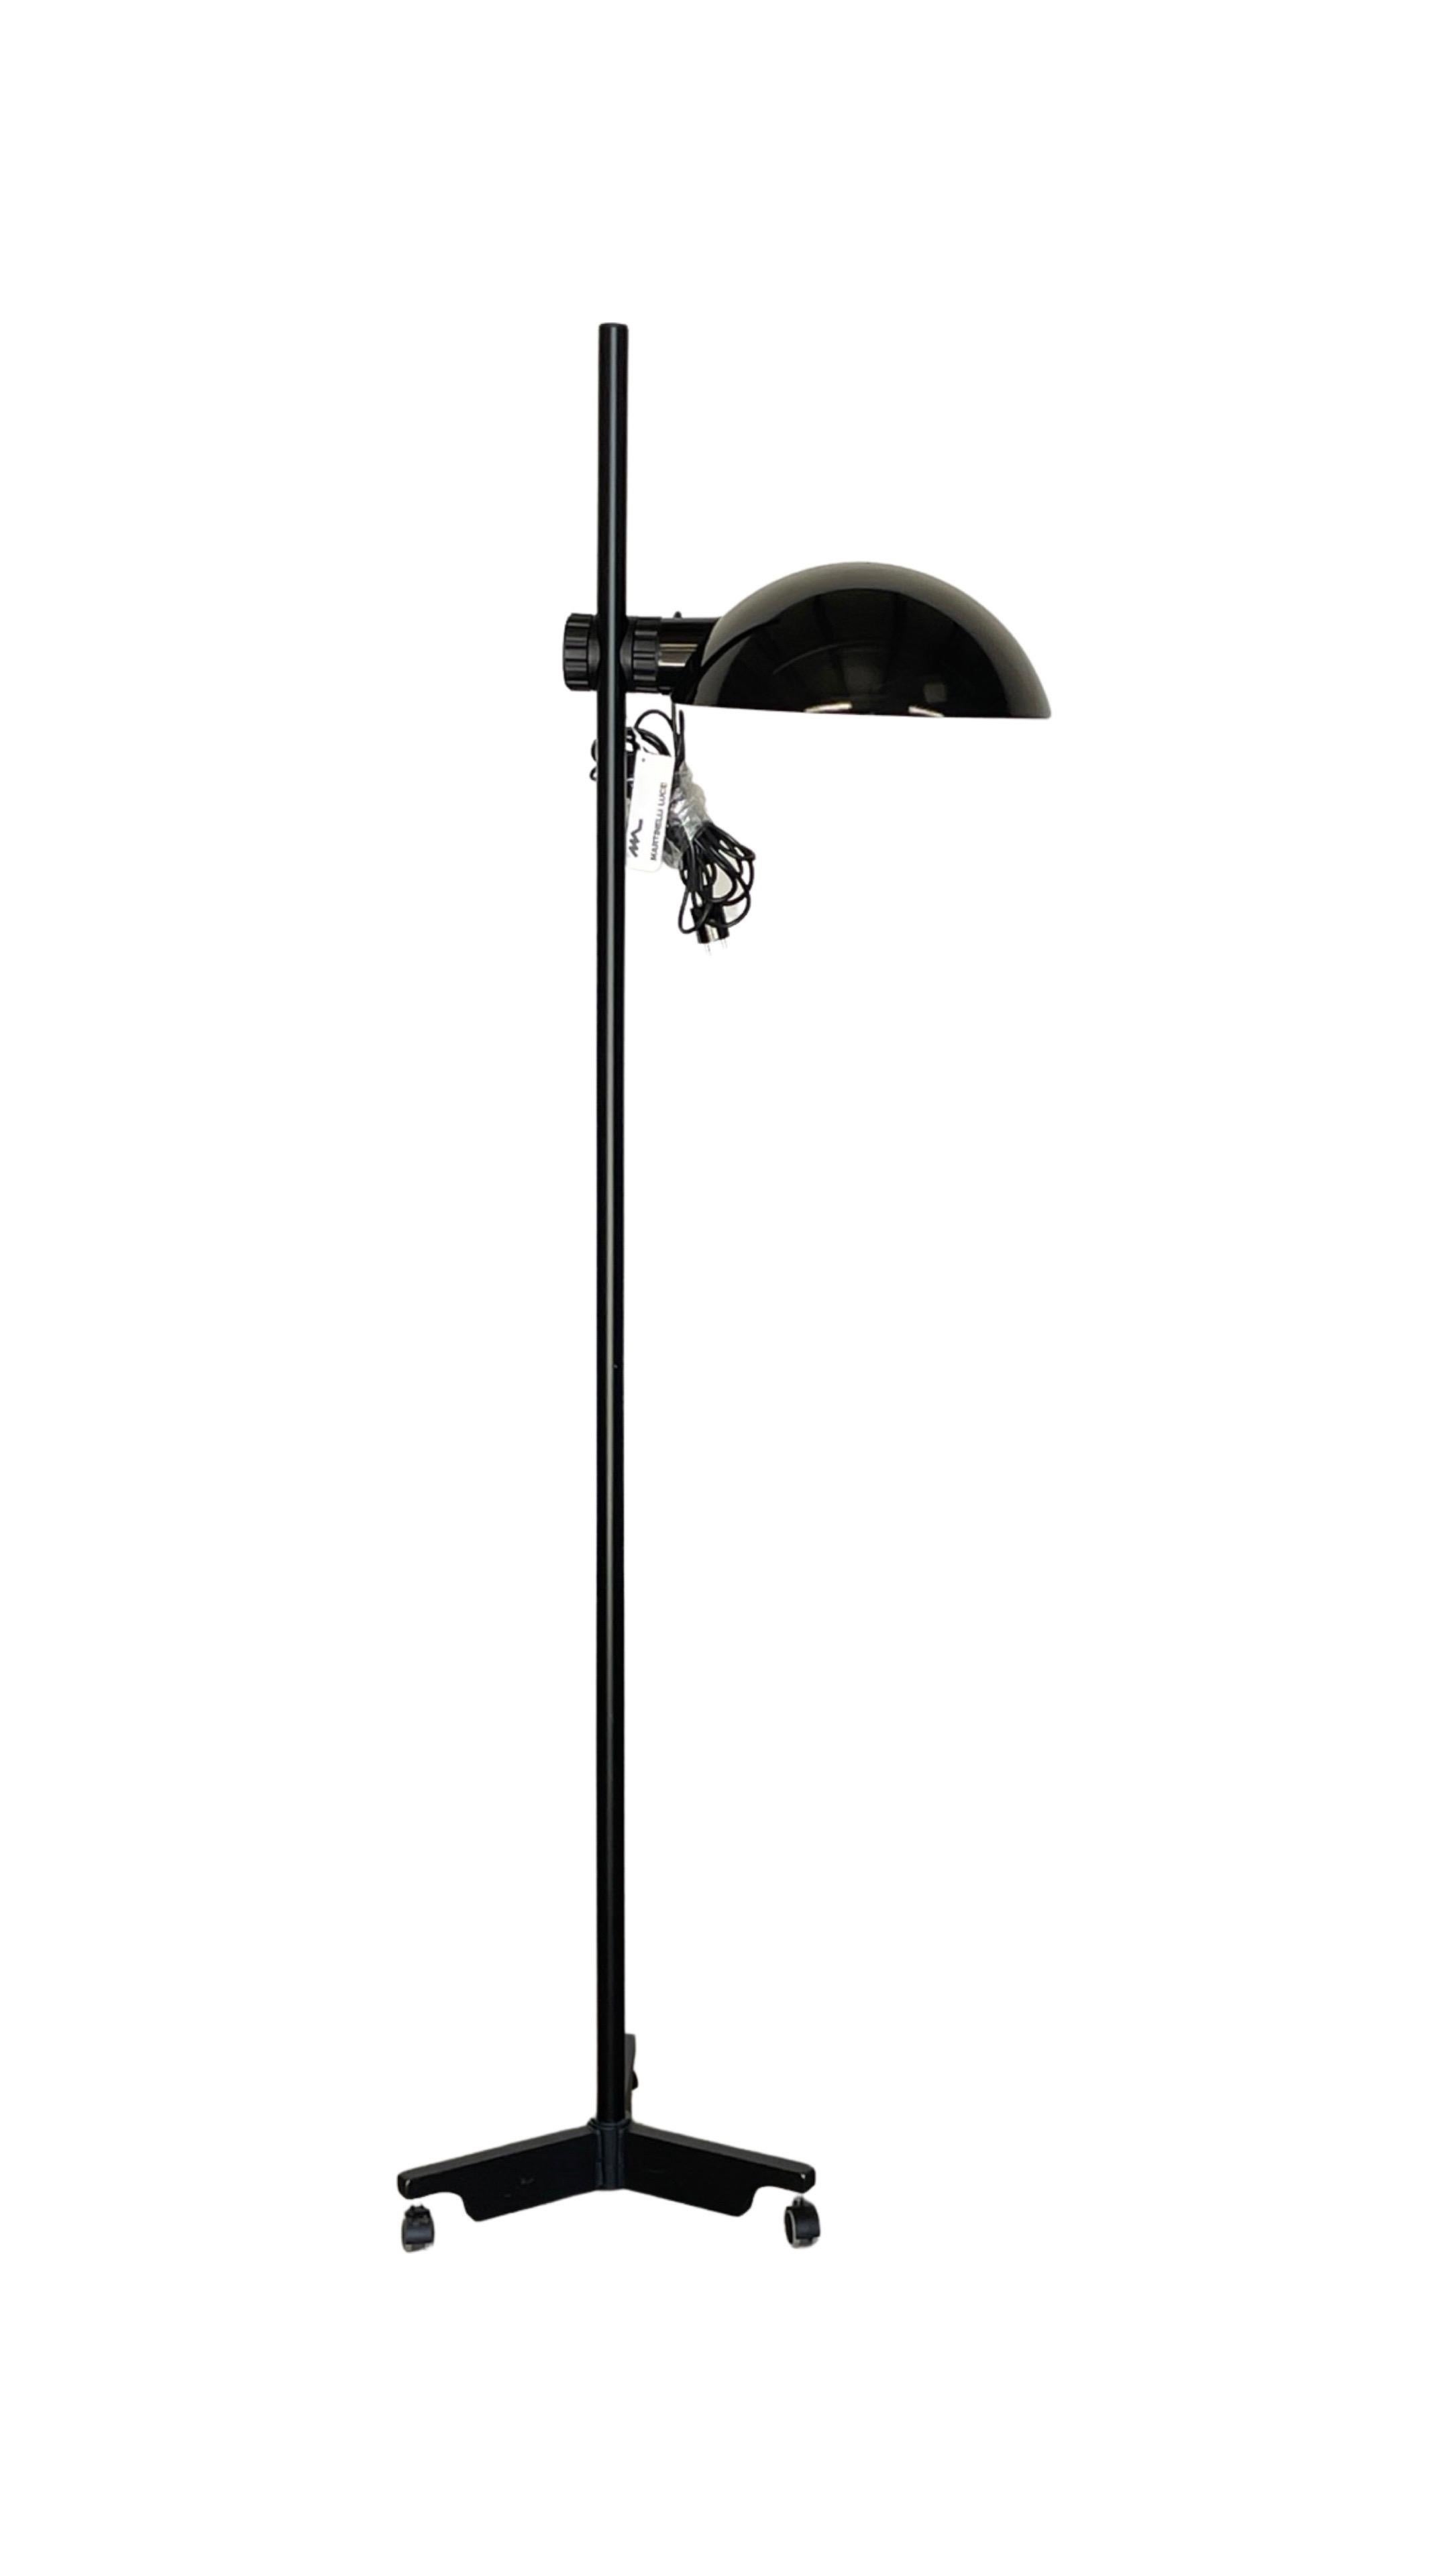 Enameled Elio Martinelli Adjustable Floor Lamp in Black for Martinelli Luce, Italy, 1970s For Sale